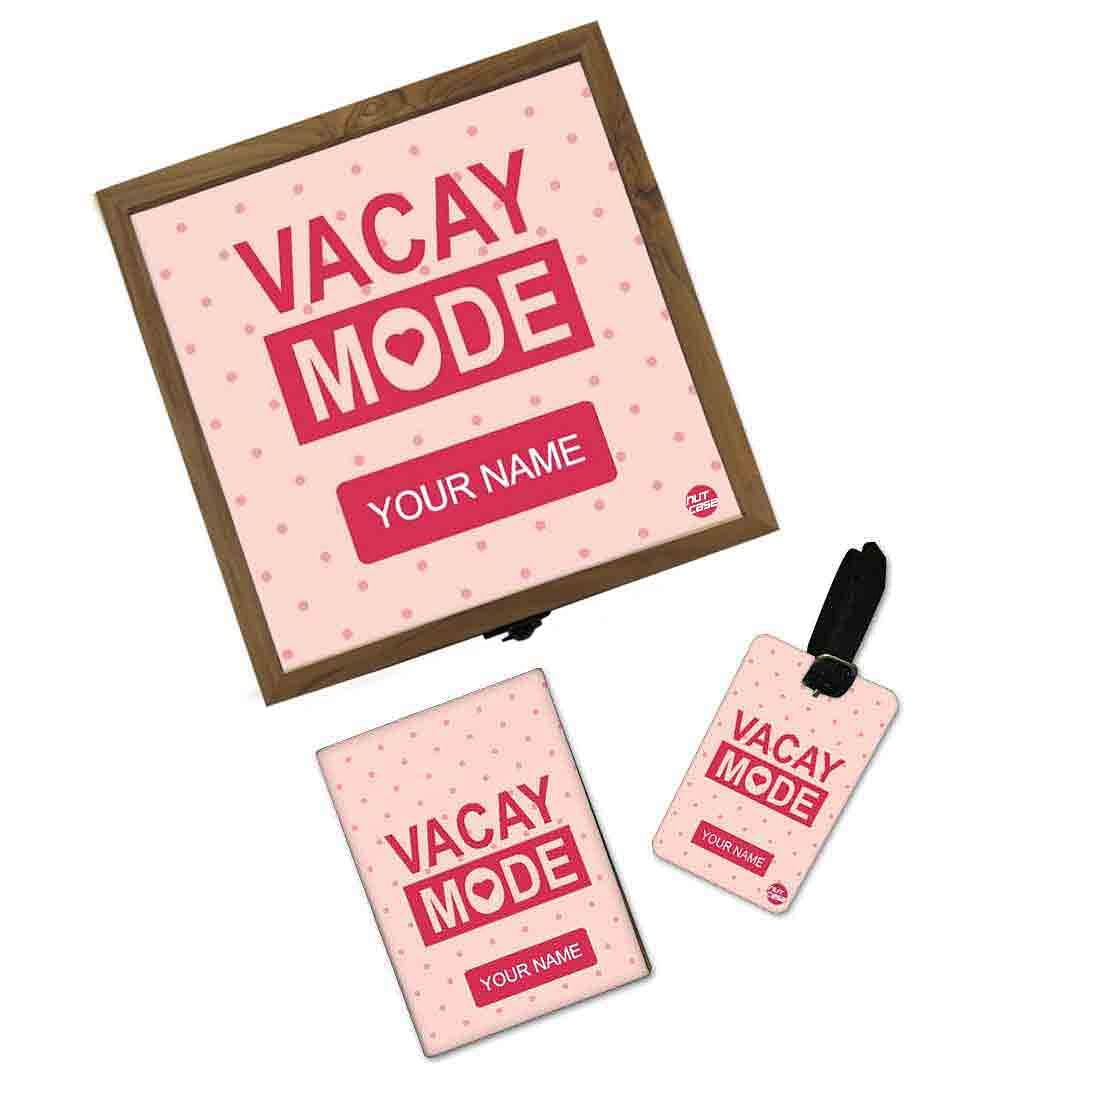 Custom Travel Gifts For Traveller's - Vacay Made Nutcase